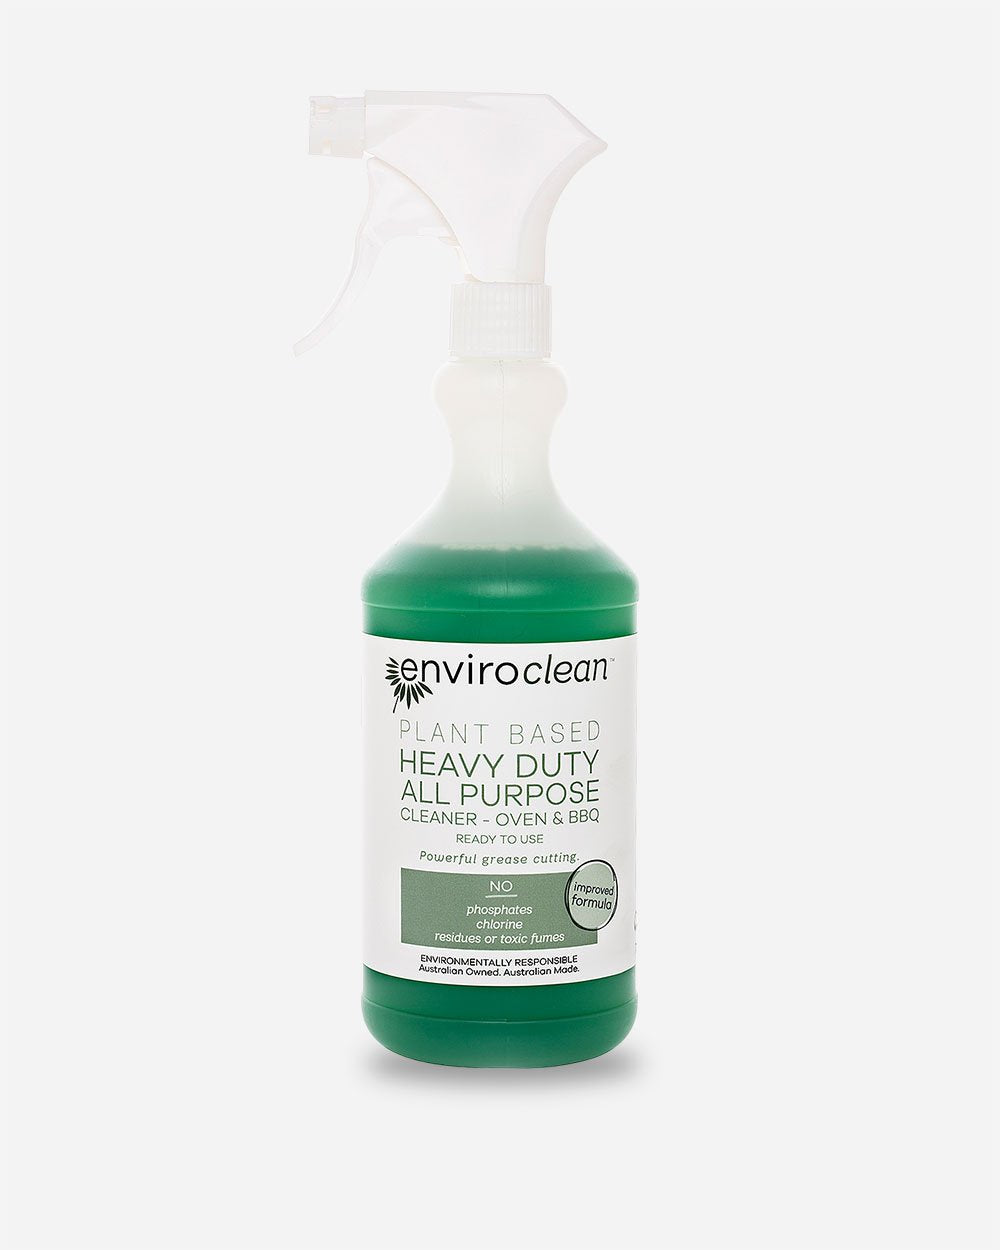 Heavy Duty All Purpose (BBQ & Oven Cleaner) from Enviroclean